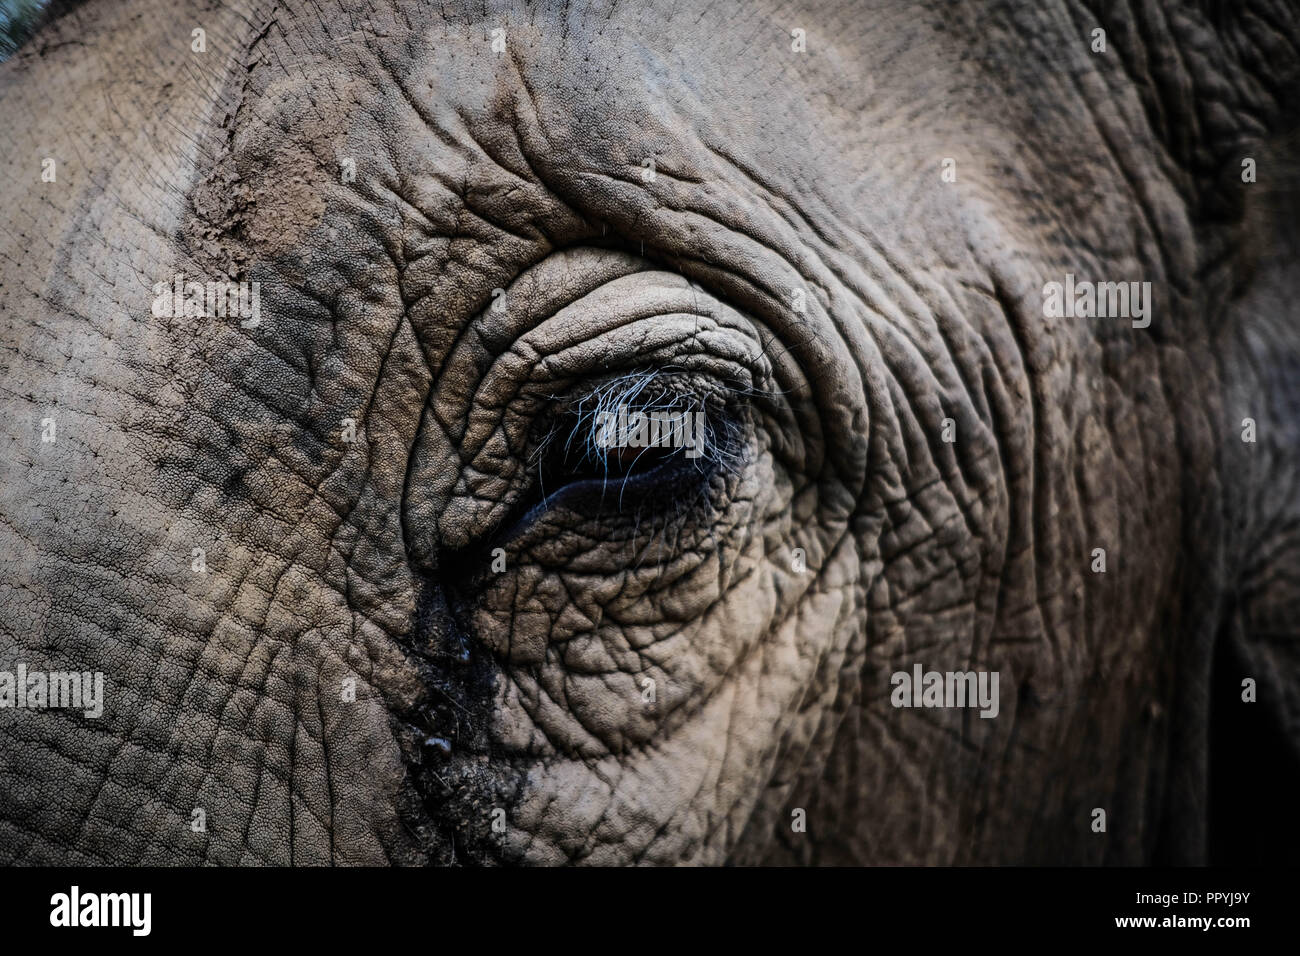 Close up of Asian Elephant in an ethical sanctuary Stock Photo